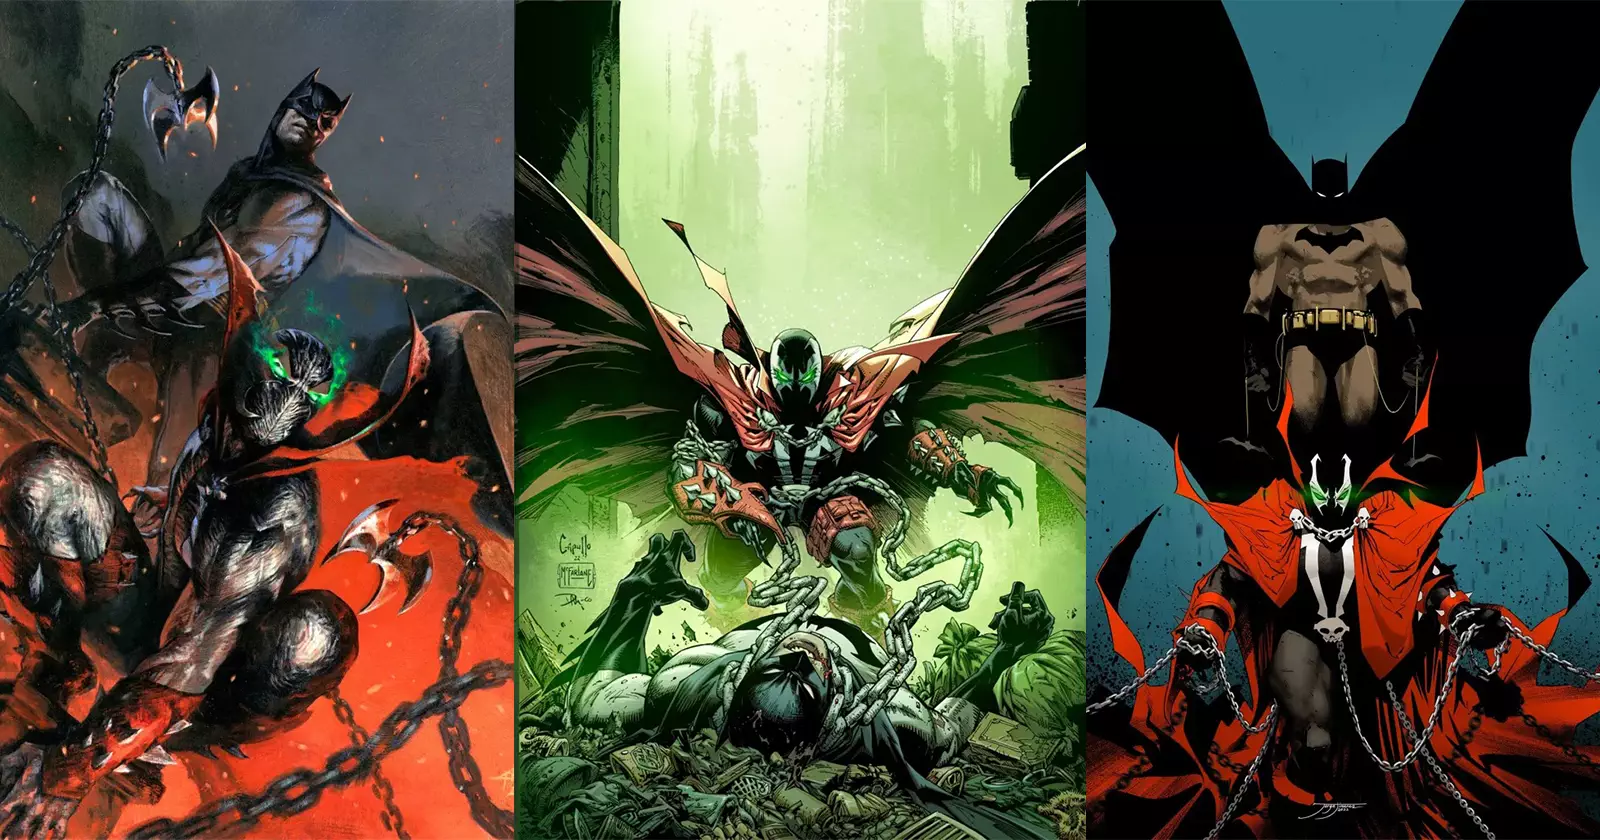 Batman/Spawn variant covers revealed at New York Comic Con